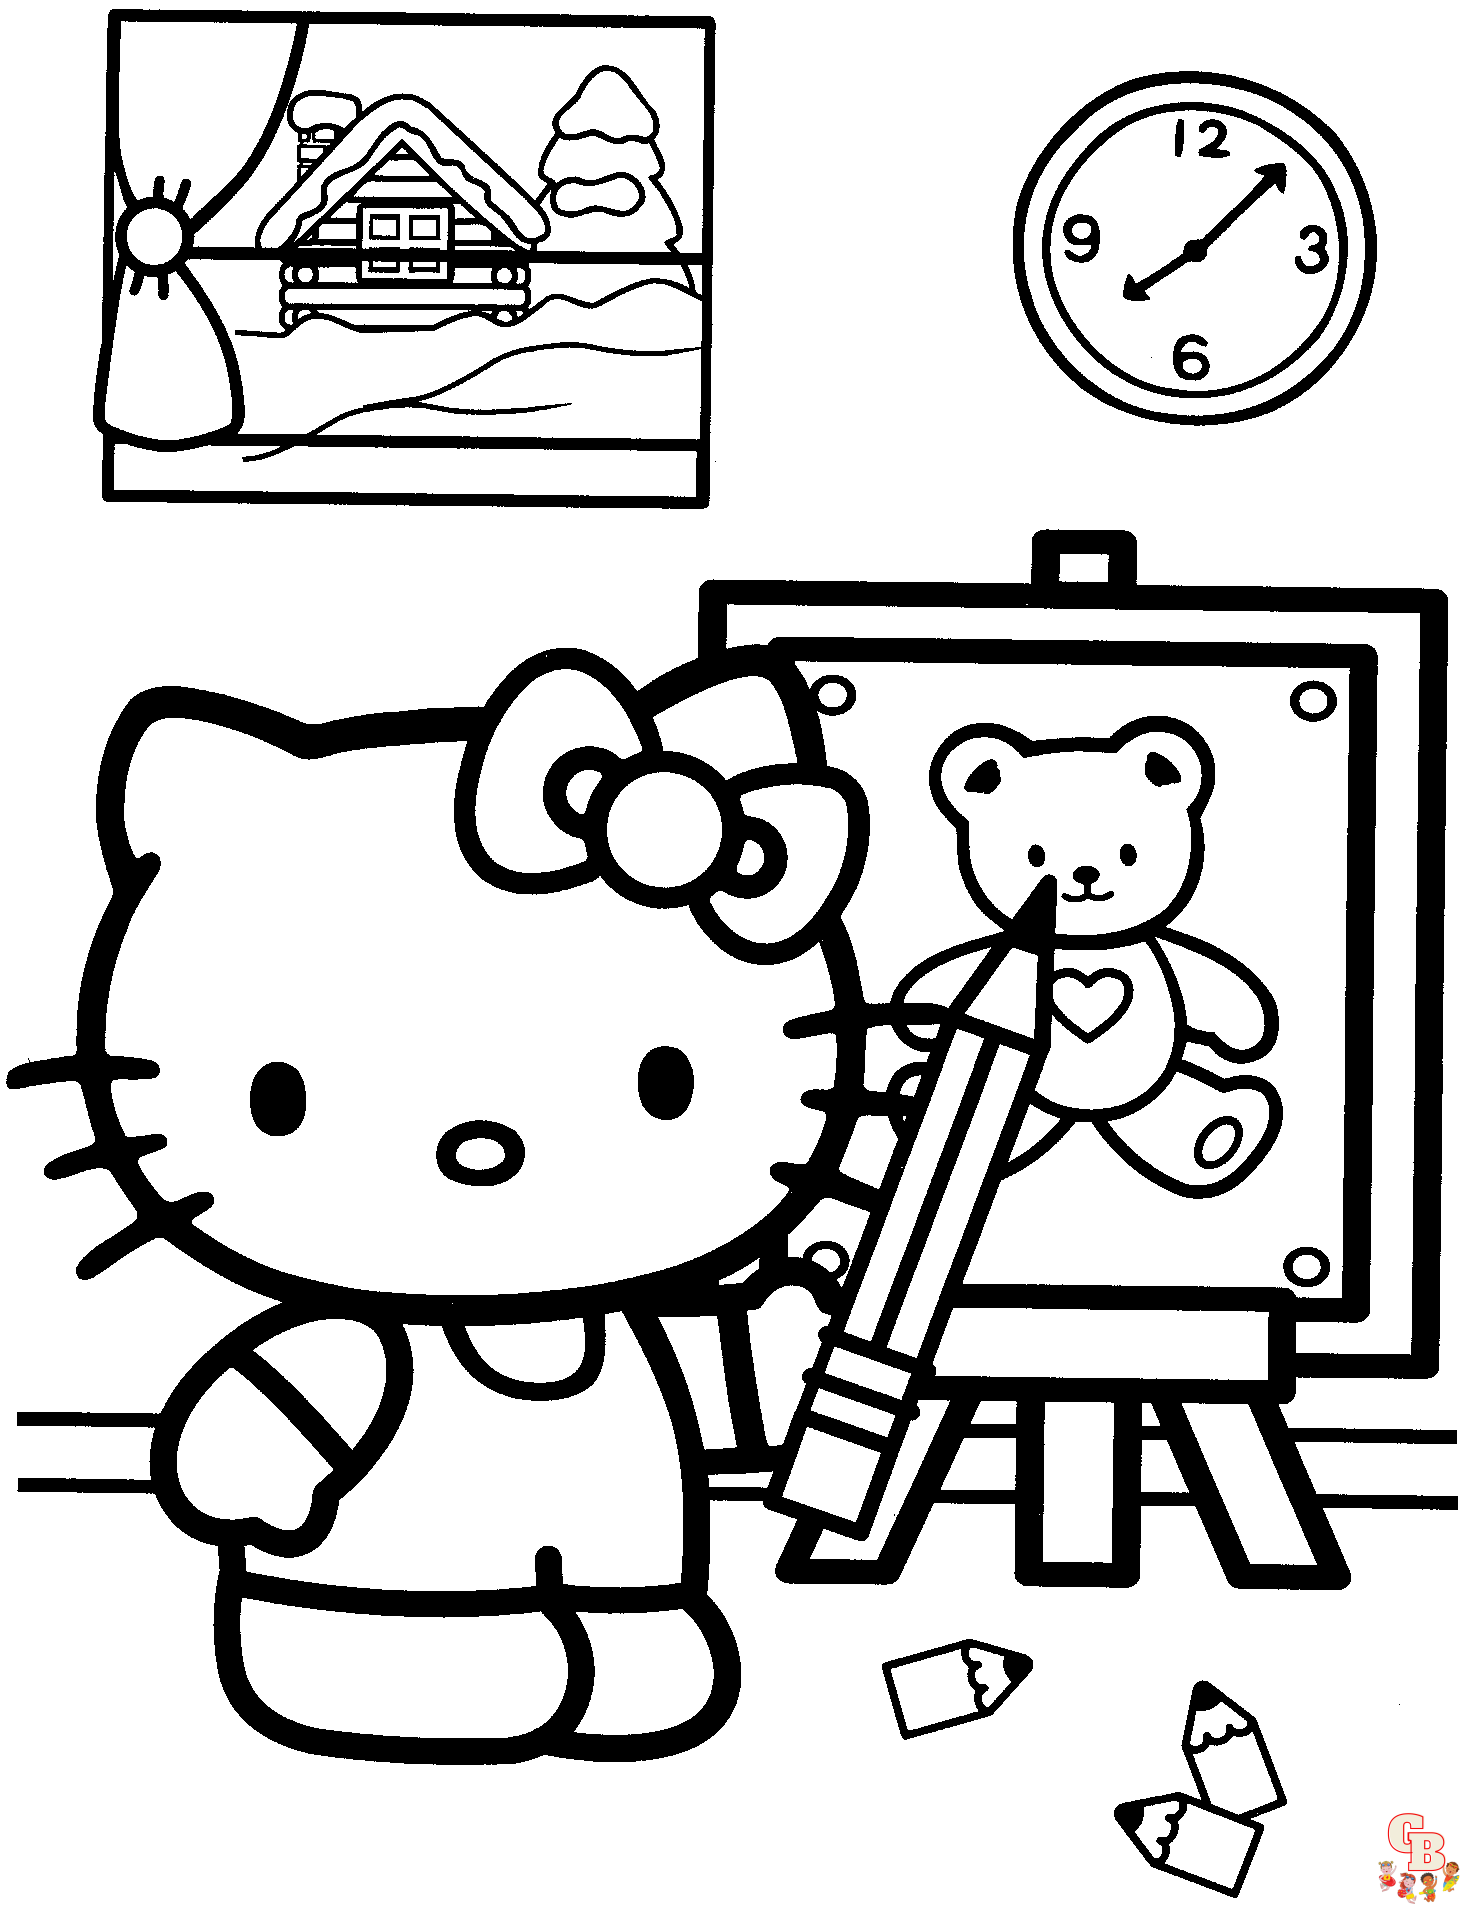 Enjoy Colorful Fun with Sanrio Coloring Pages | GBcoloring